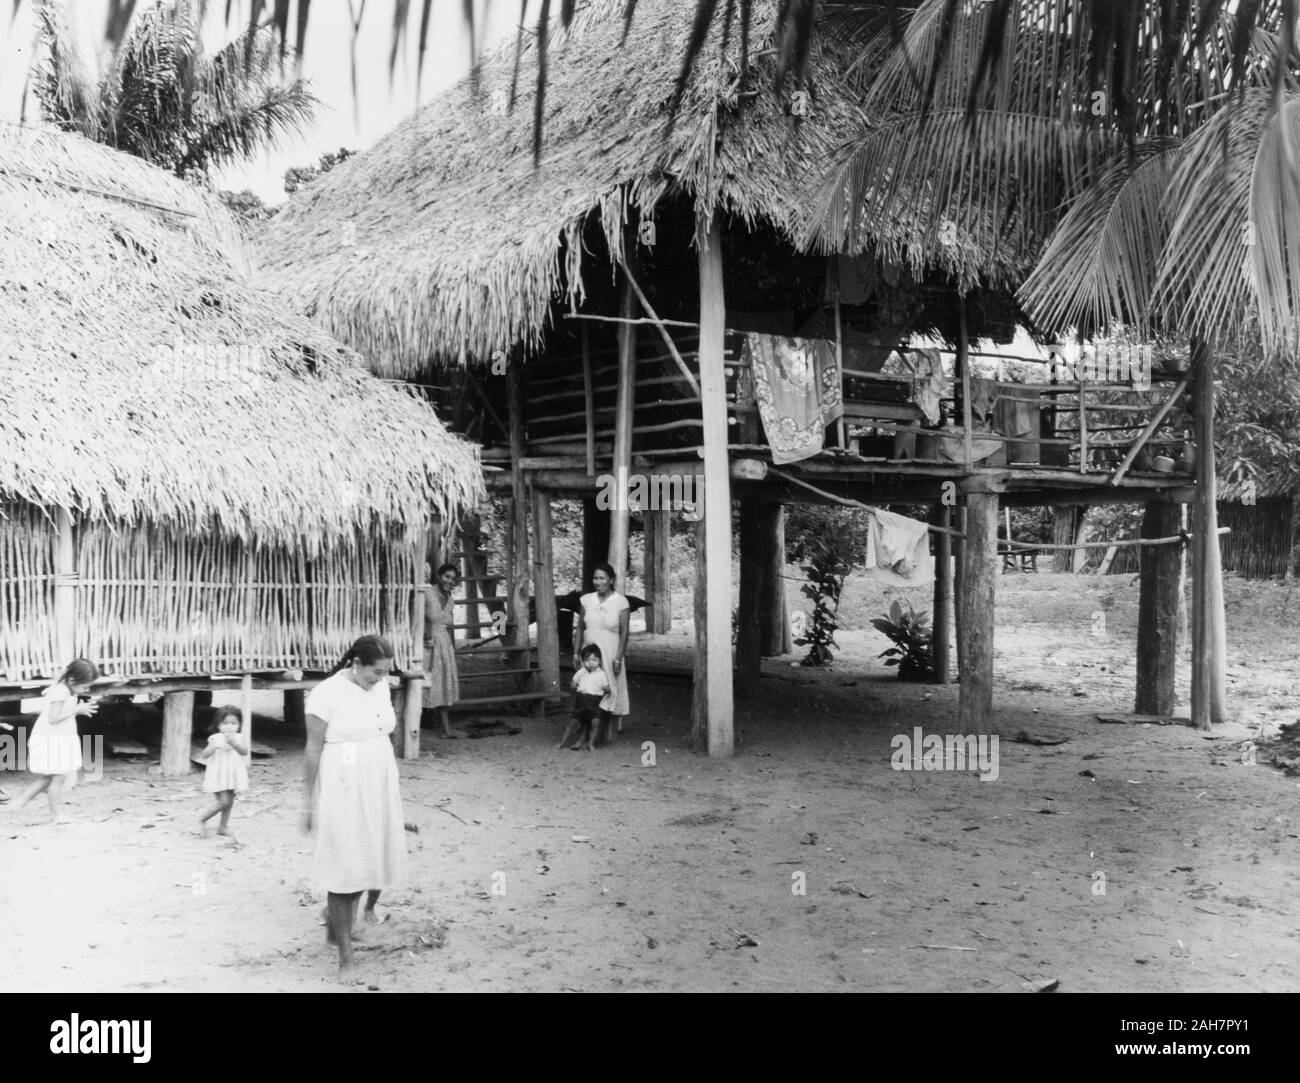 British Guyana, An Amerindian village in British GuianaAmerindian women and children relax outdoors below the stilted, thatched dwellings of a Guyanese village. British Guiana (Guyana), 1965, 1965. 2005/010/1/13/87. Stock Photo